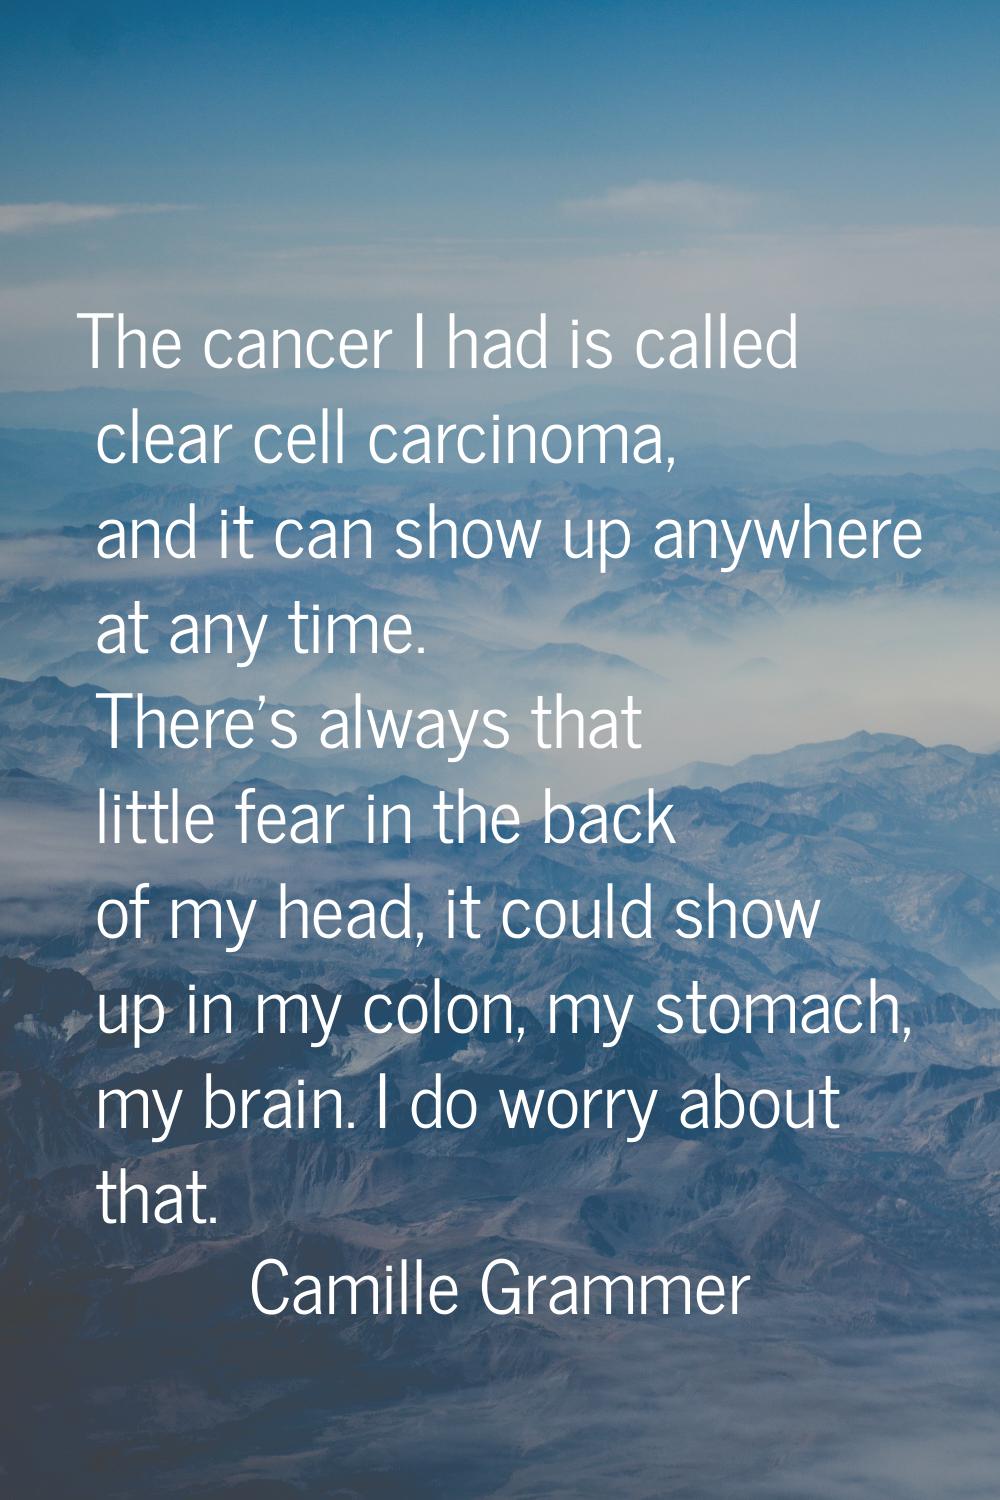 The cancer I had is called clear cell carcinoma, and it can show up anywhere at any time. There's a